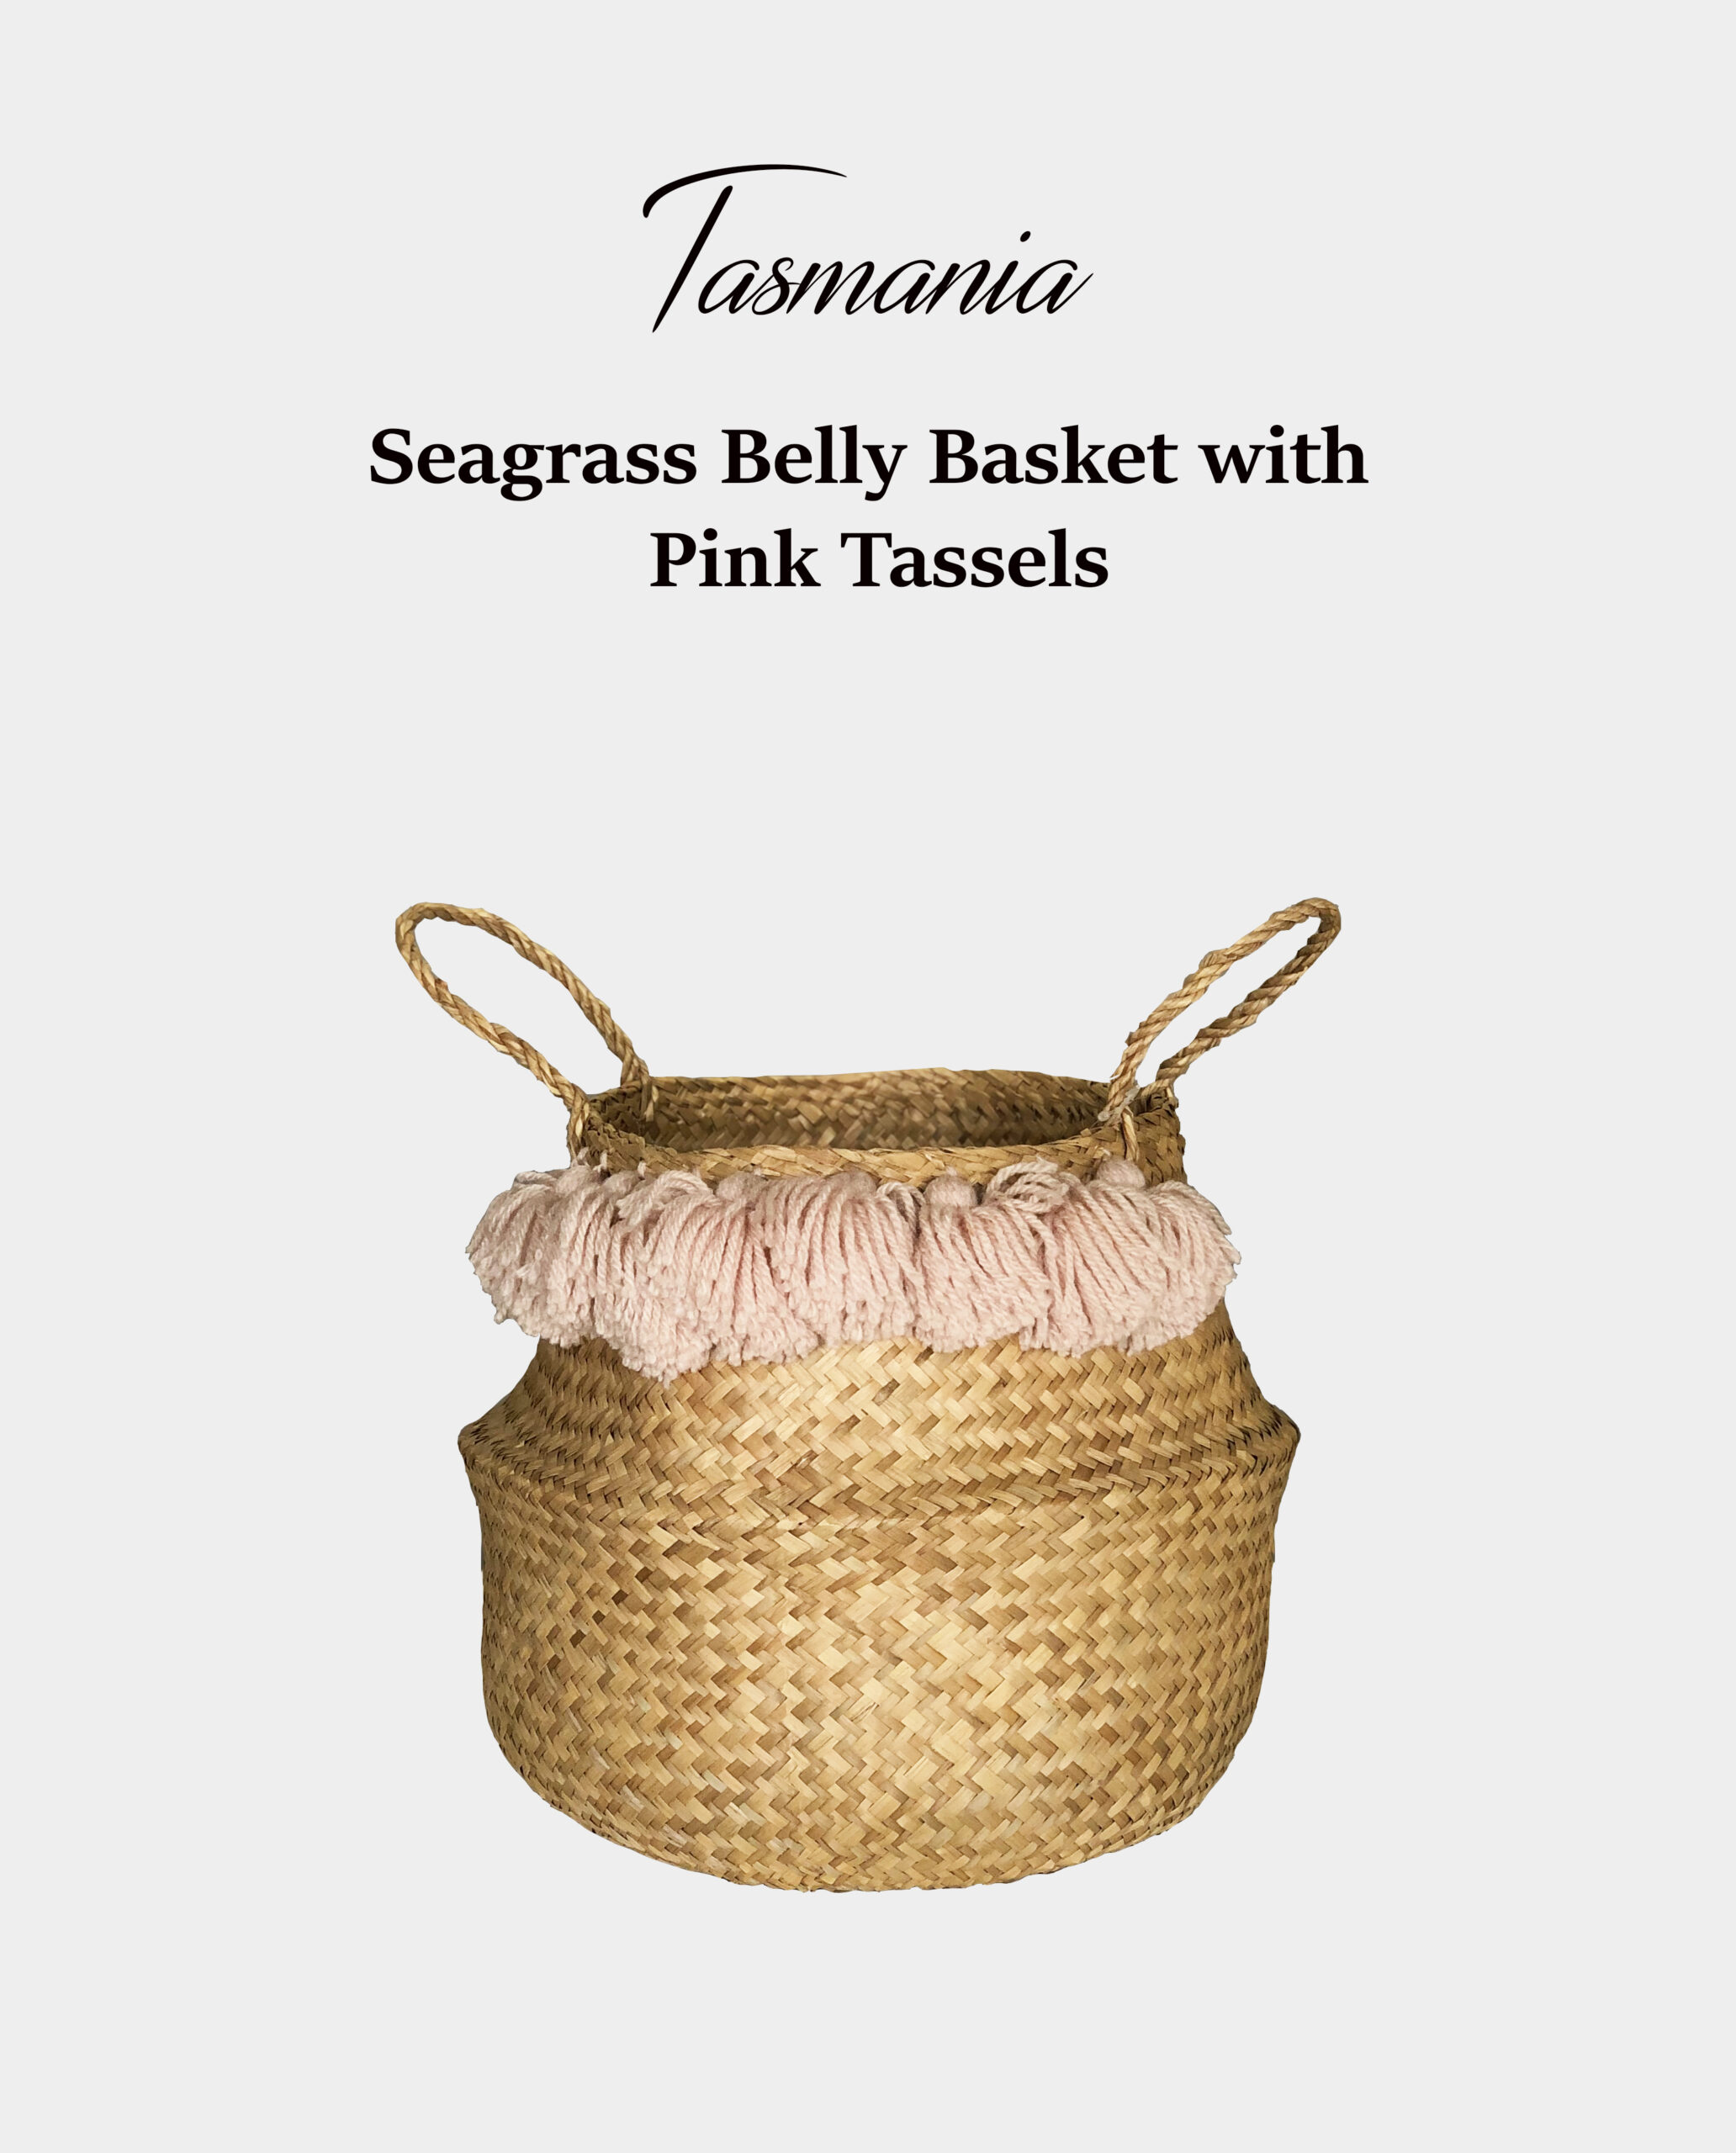 Seagrass Belly Basket with Pink Tassels